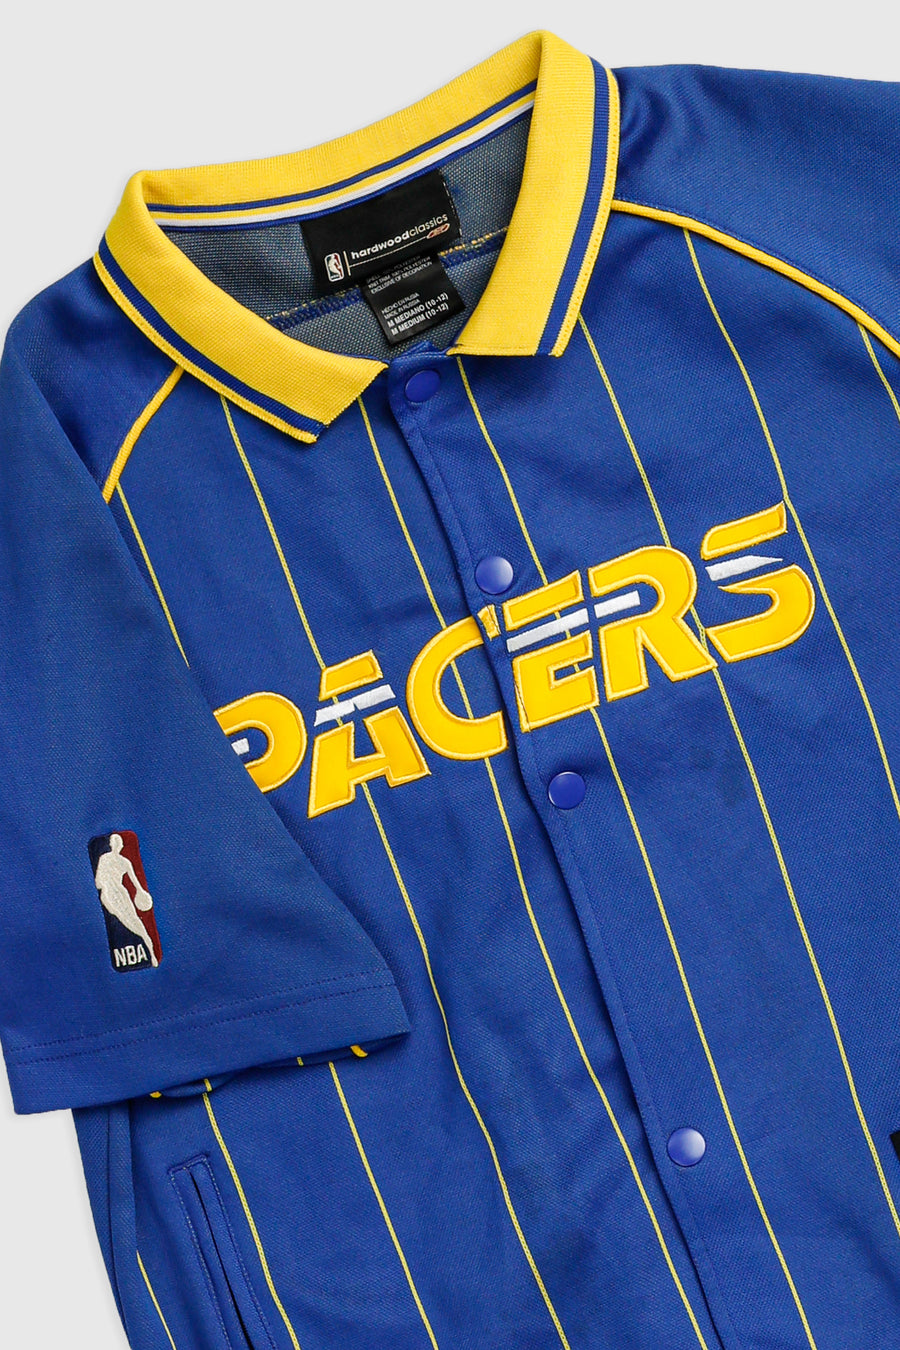 Vintage Indiana Pacers NBA Warm Up Jersey - Women's S